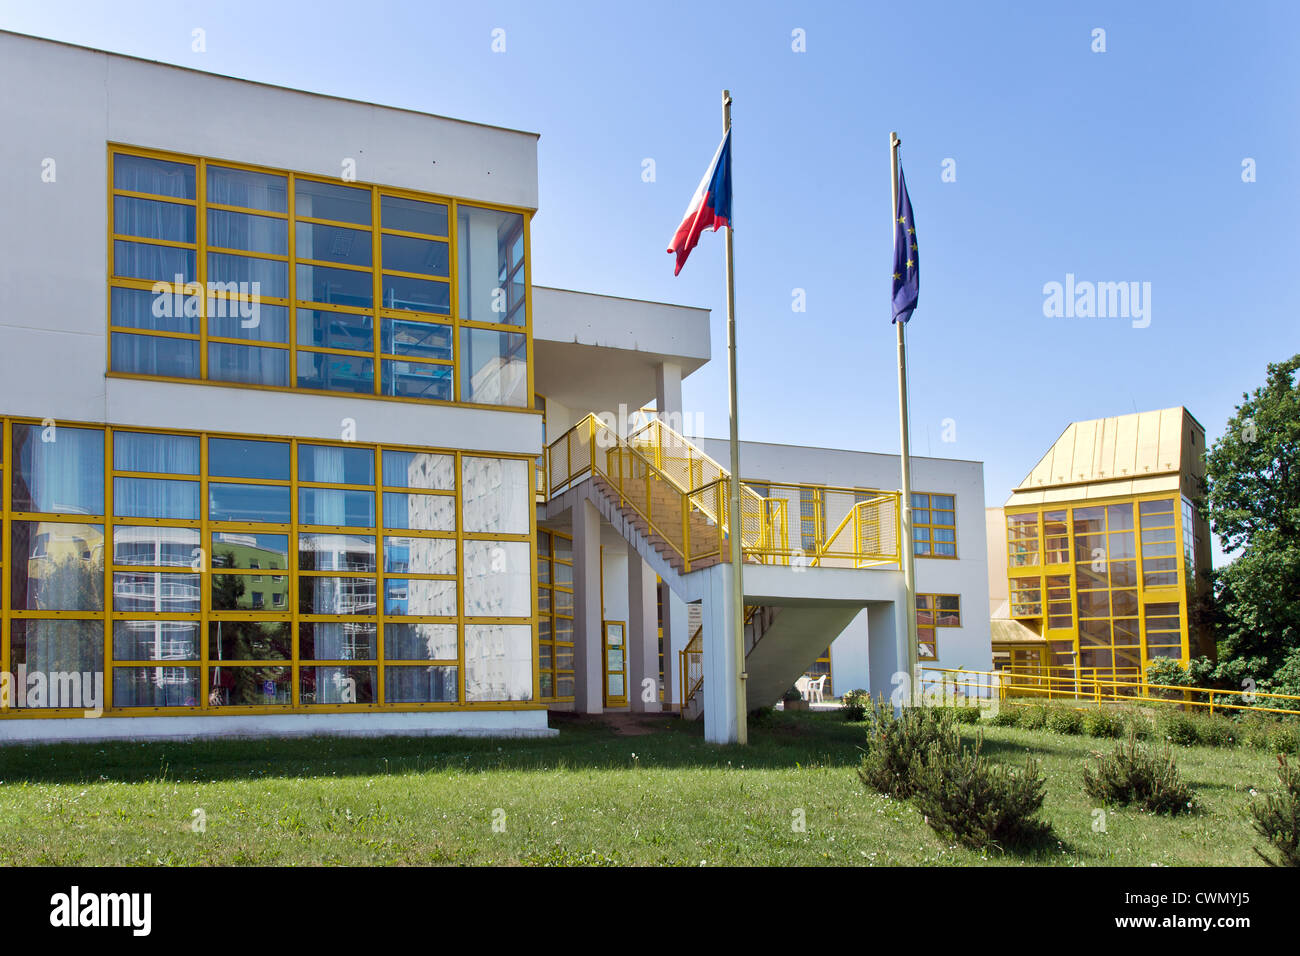 Seniory High Resolution Stock Photography and Images - Alamy